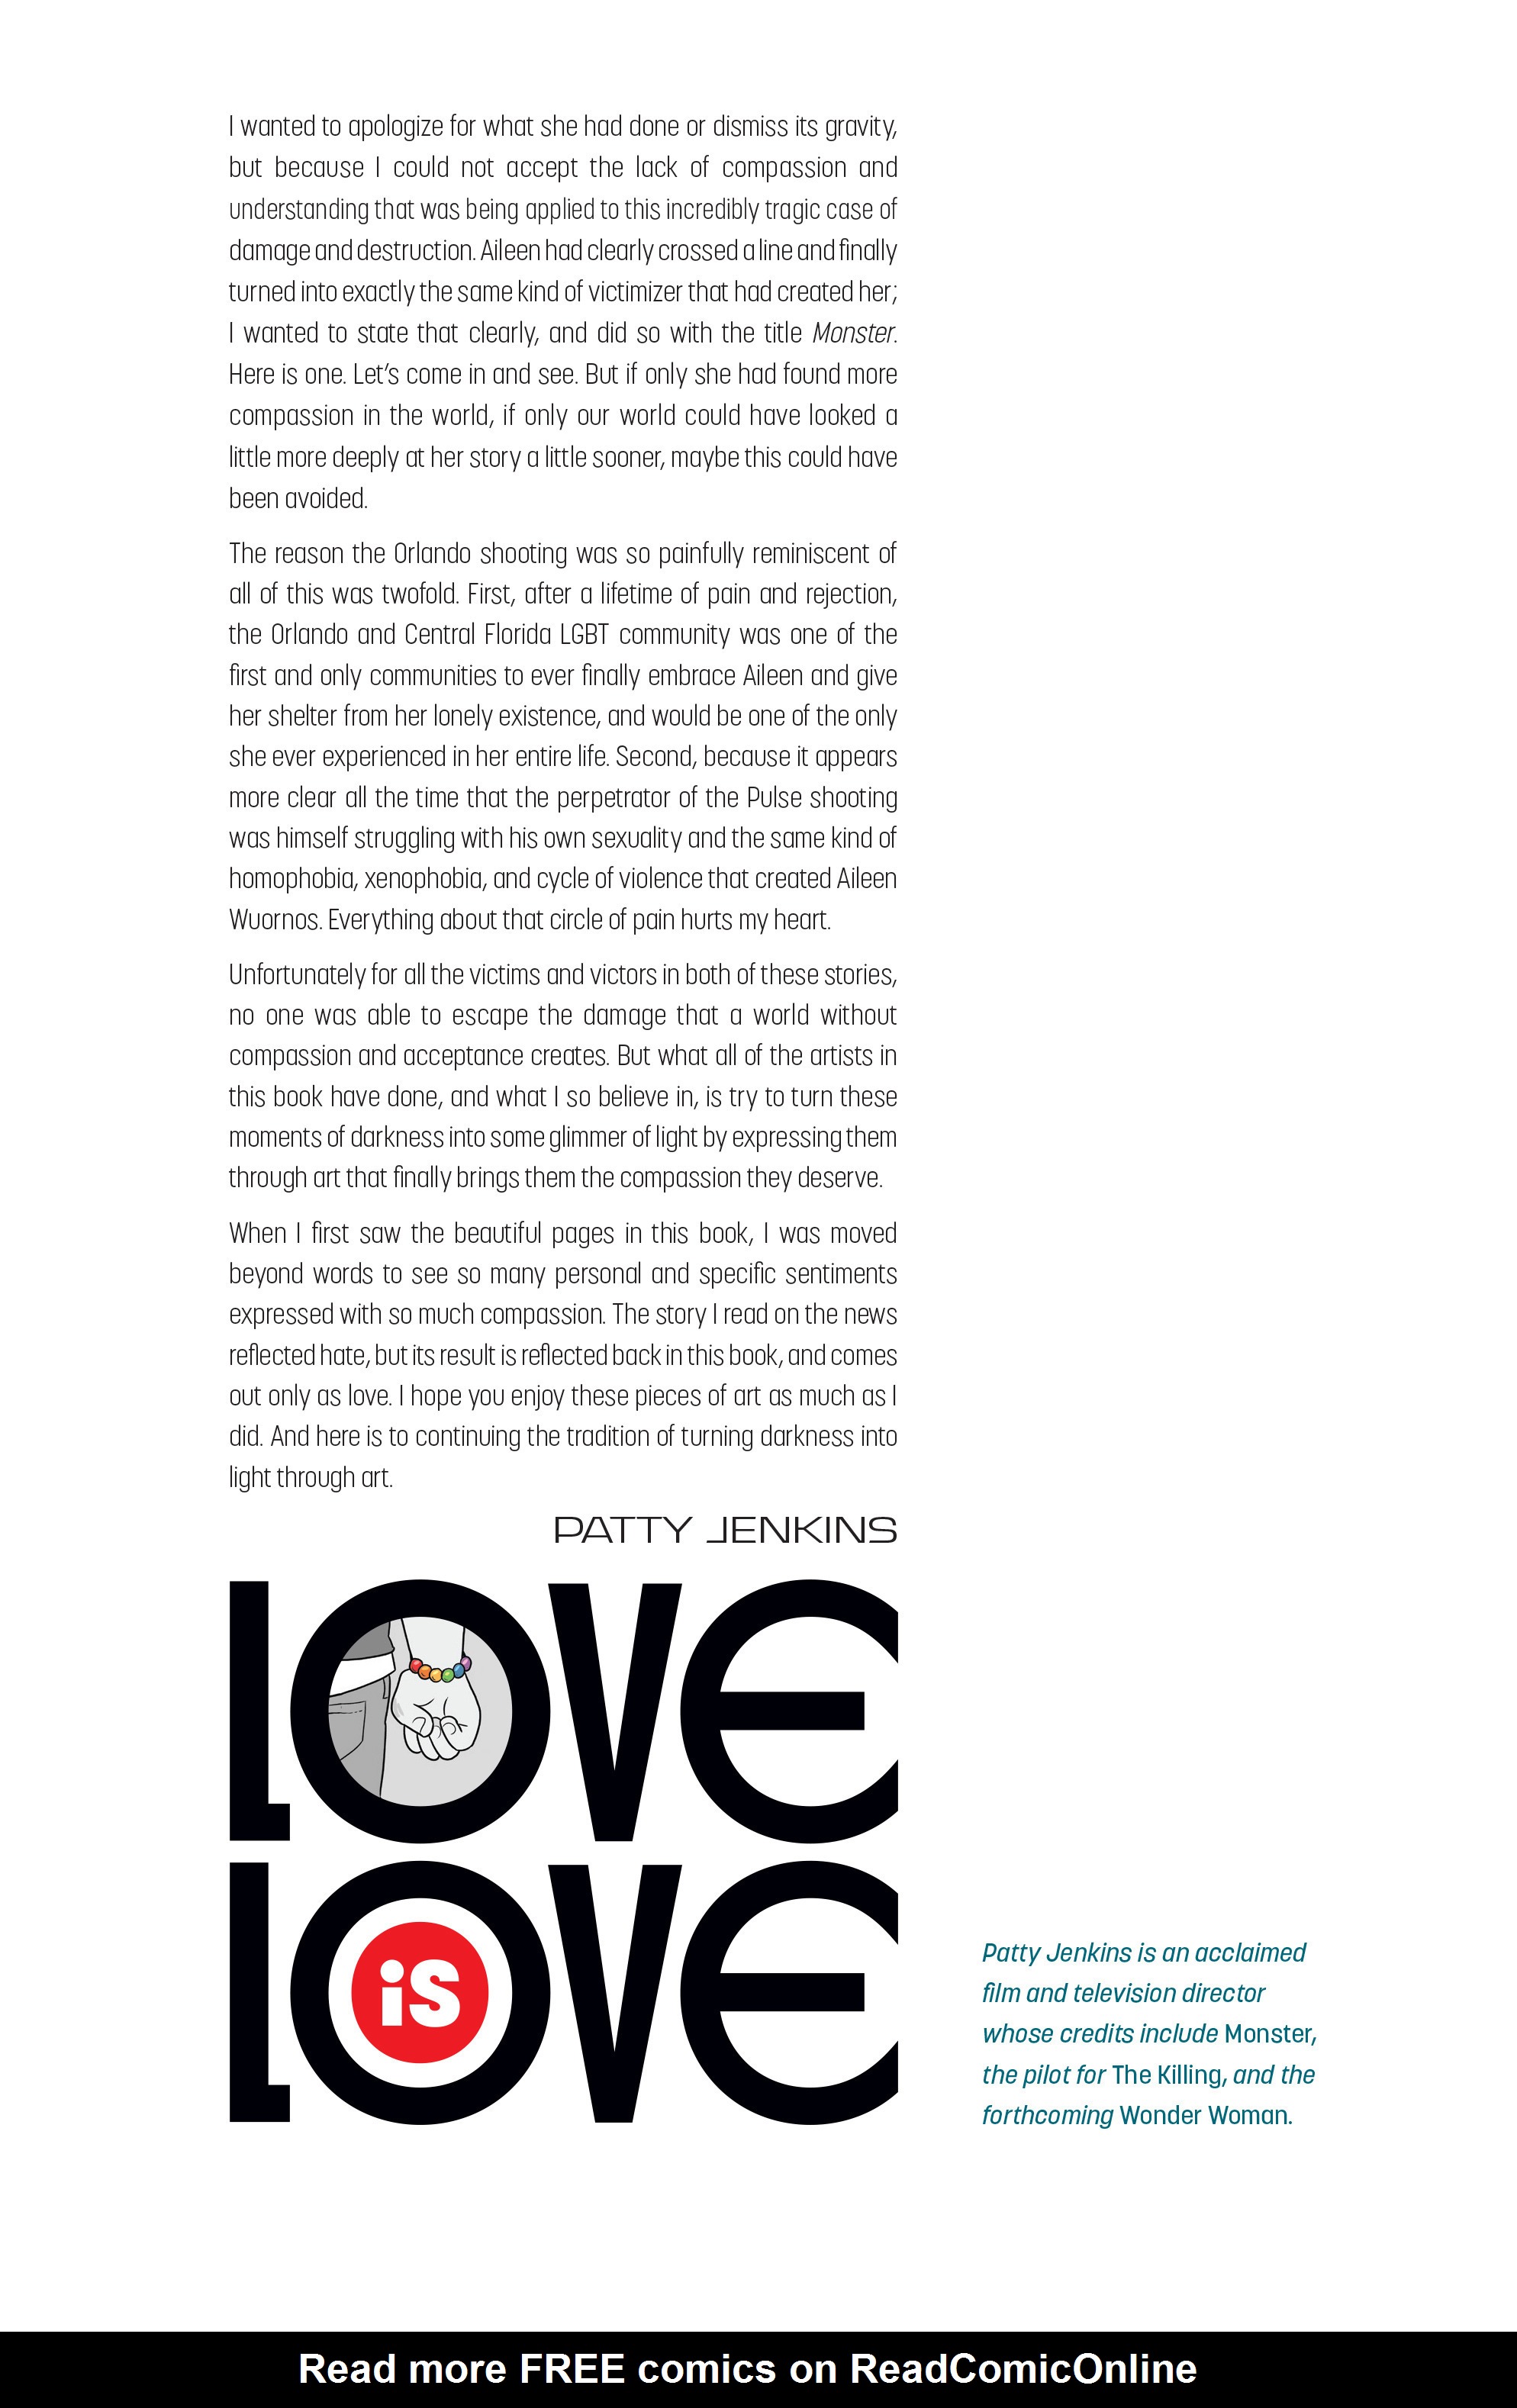 Read online Love Is Love comic -  Issue # TPB - 5